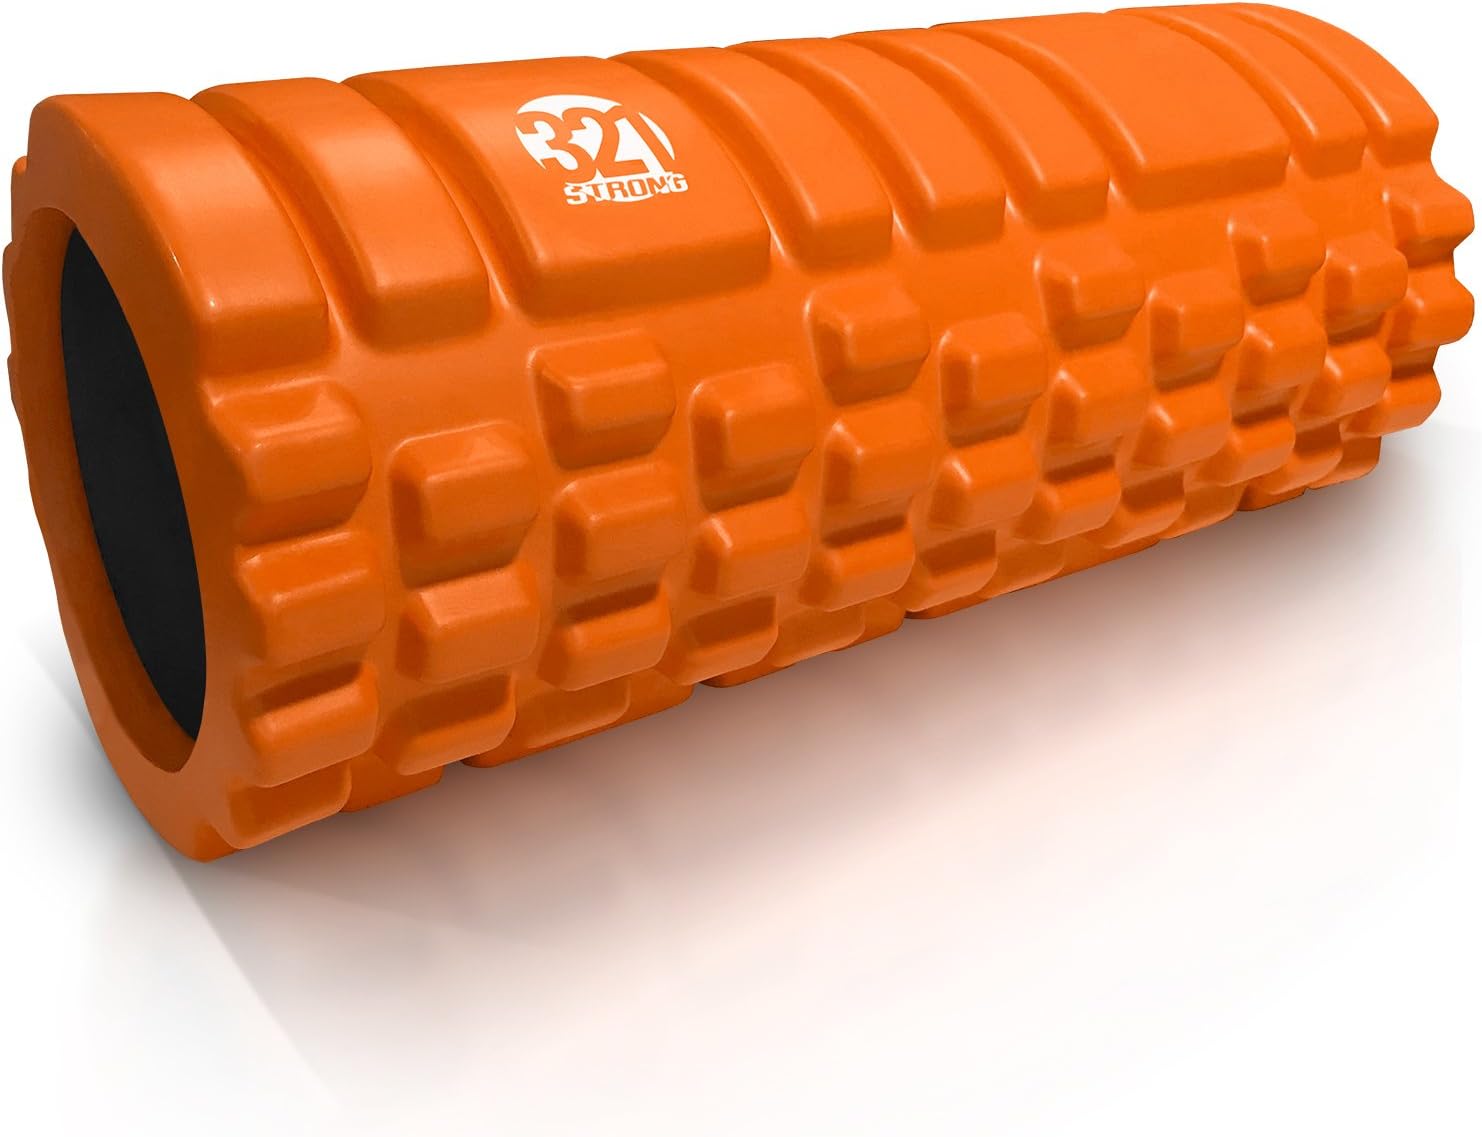 321 Strong Roller | Gadgets to Relieve Sore Muscles